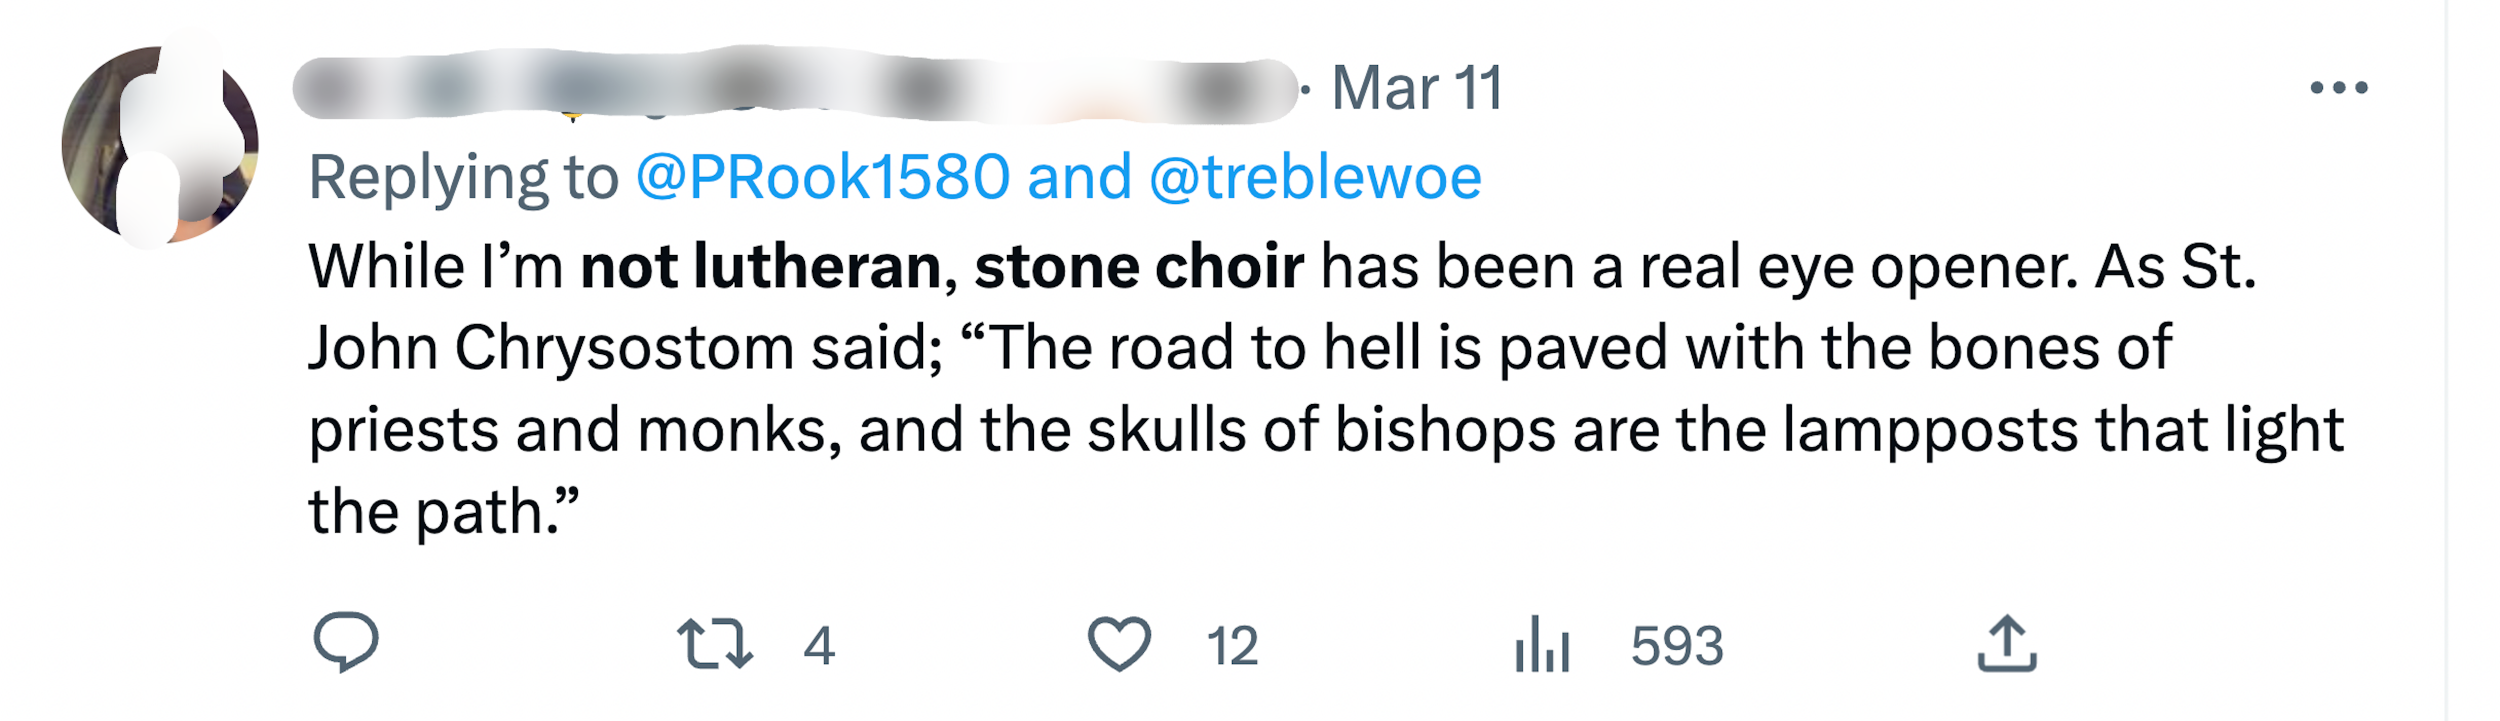 Twitter user writes: "While I'm not lutheran, stone choir has been a real eye opener. As St. John Chrysostom said, 'The road to hell is paved with the bones of priests and monks, and the skulls of bishops are the lampposts that light the path."